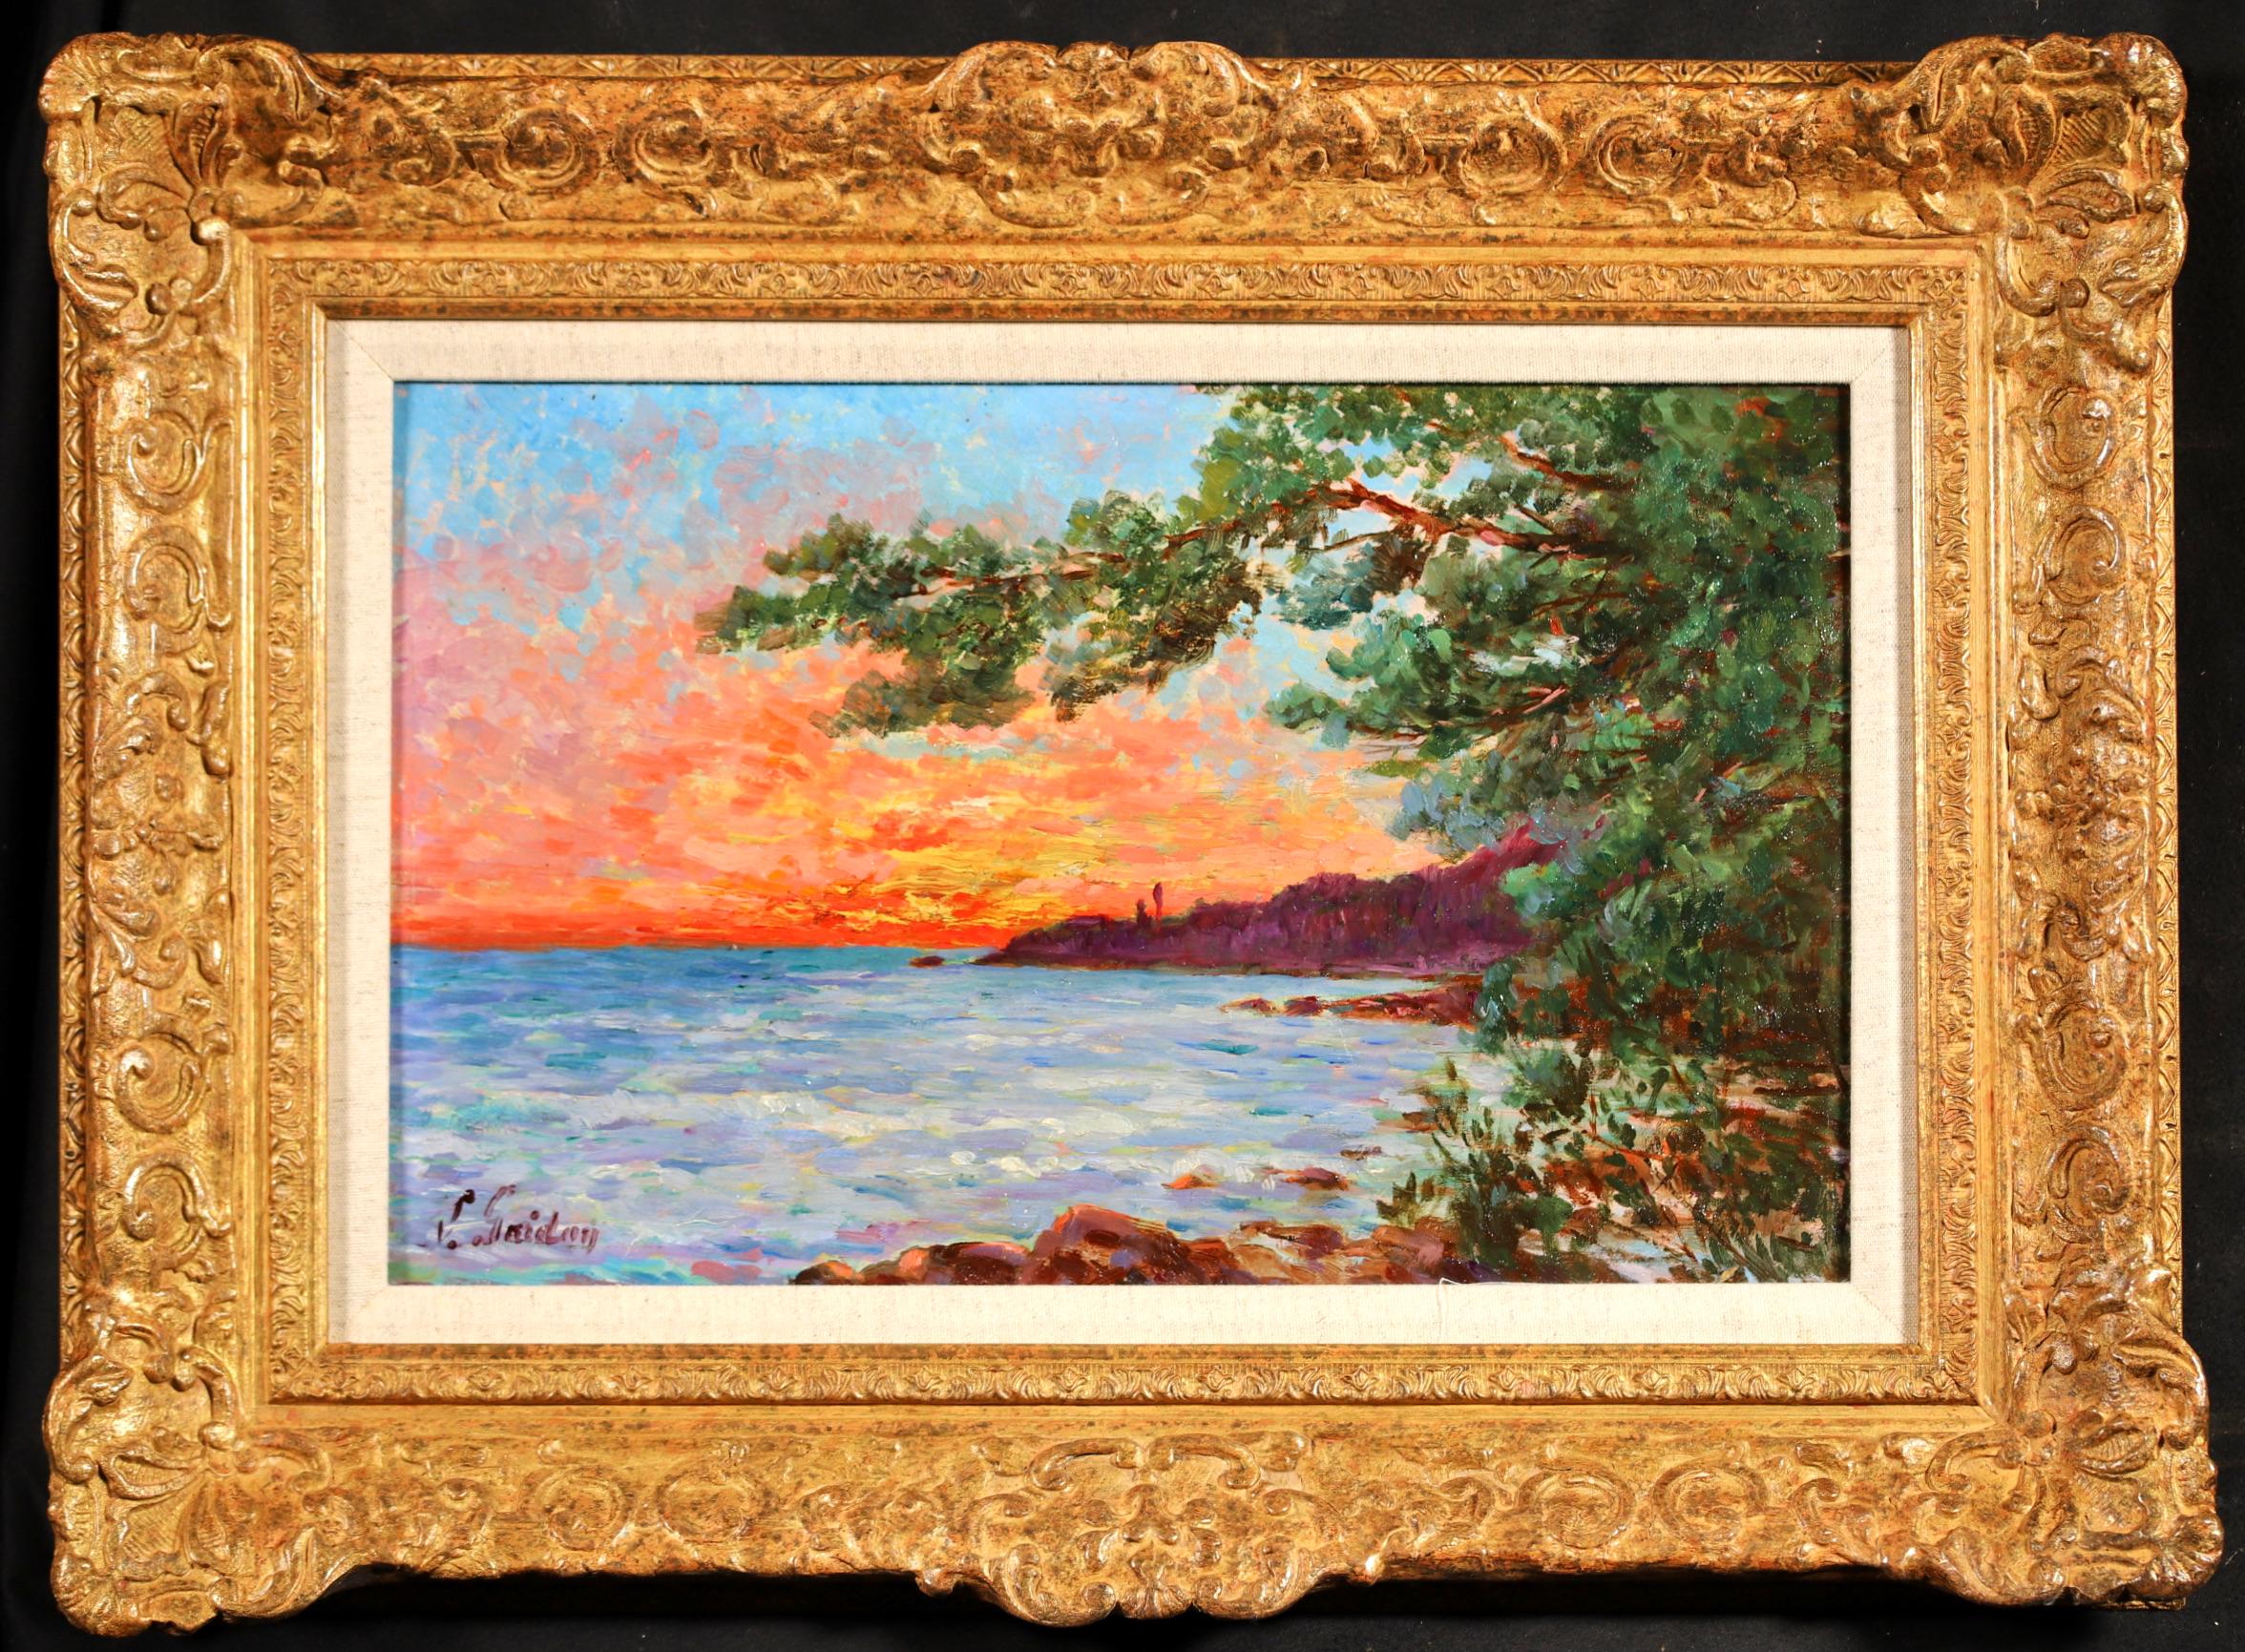 Signed costal landscape oil on panel circa 1890 by French neo-impressionist painter Louis Gaidan. The piece depicts a sunset creating orange and red light on the horizon beyond a rocky shoreline in Carqueiranne, in the Cote d'Azur in Southeastern